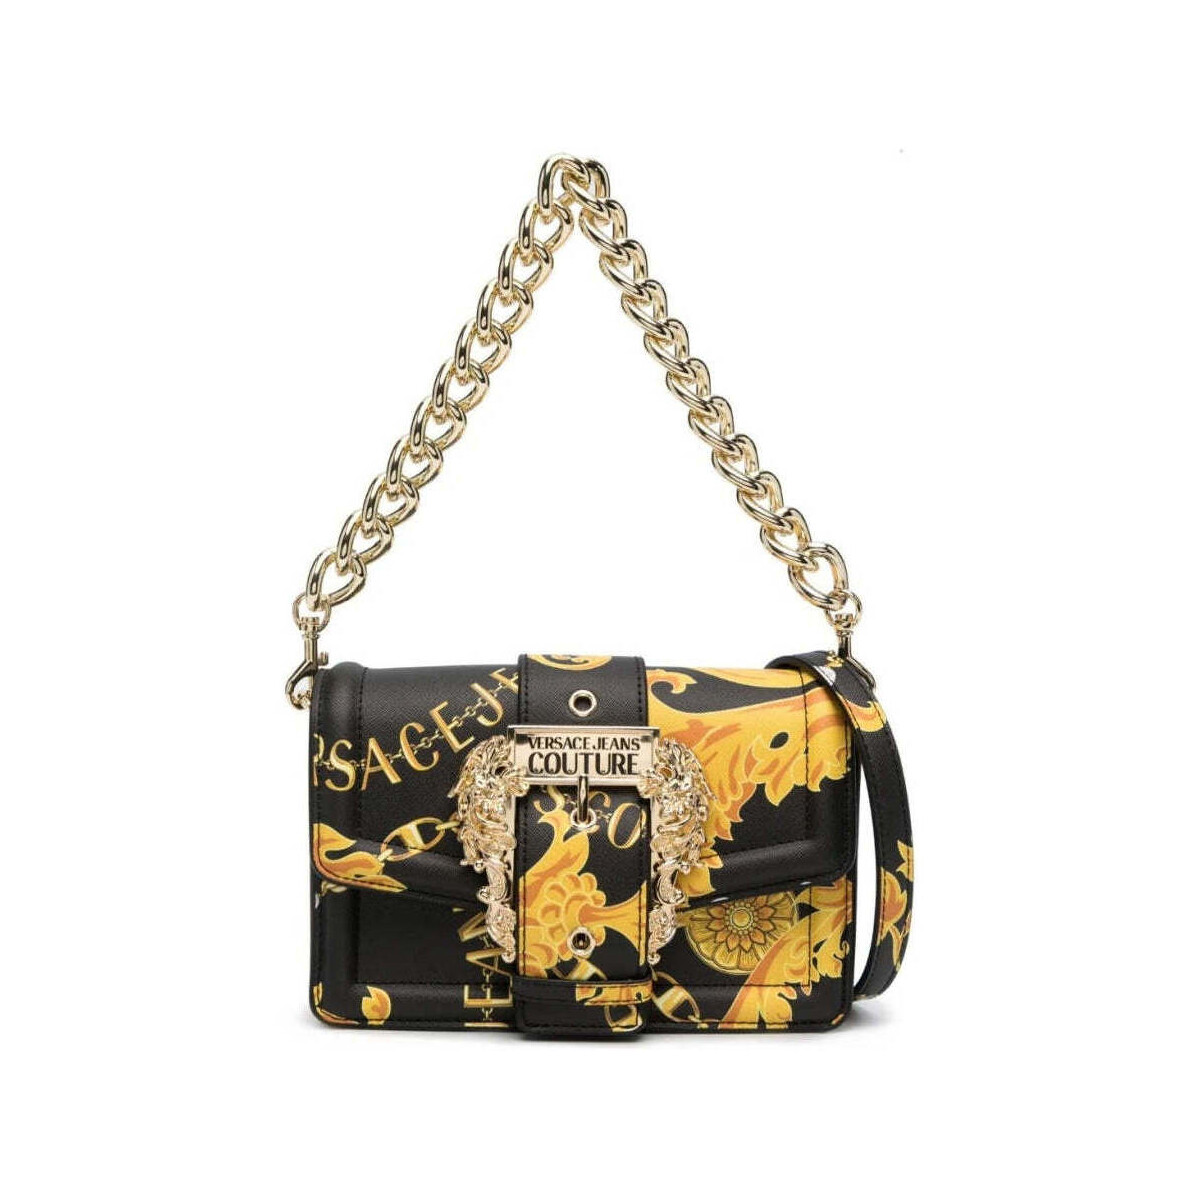 Versace Jeans Couture Multicolore couture crossbody black gold 5O8KE8AC